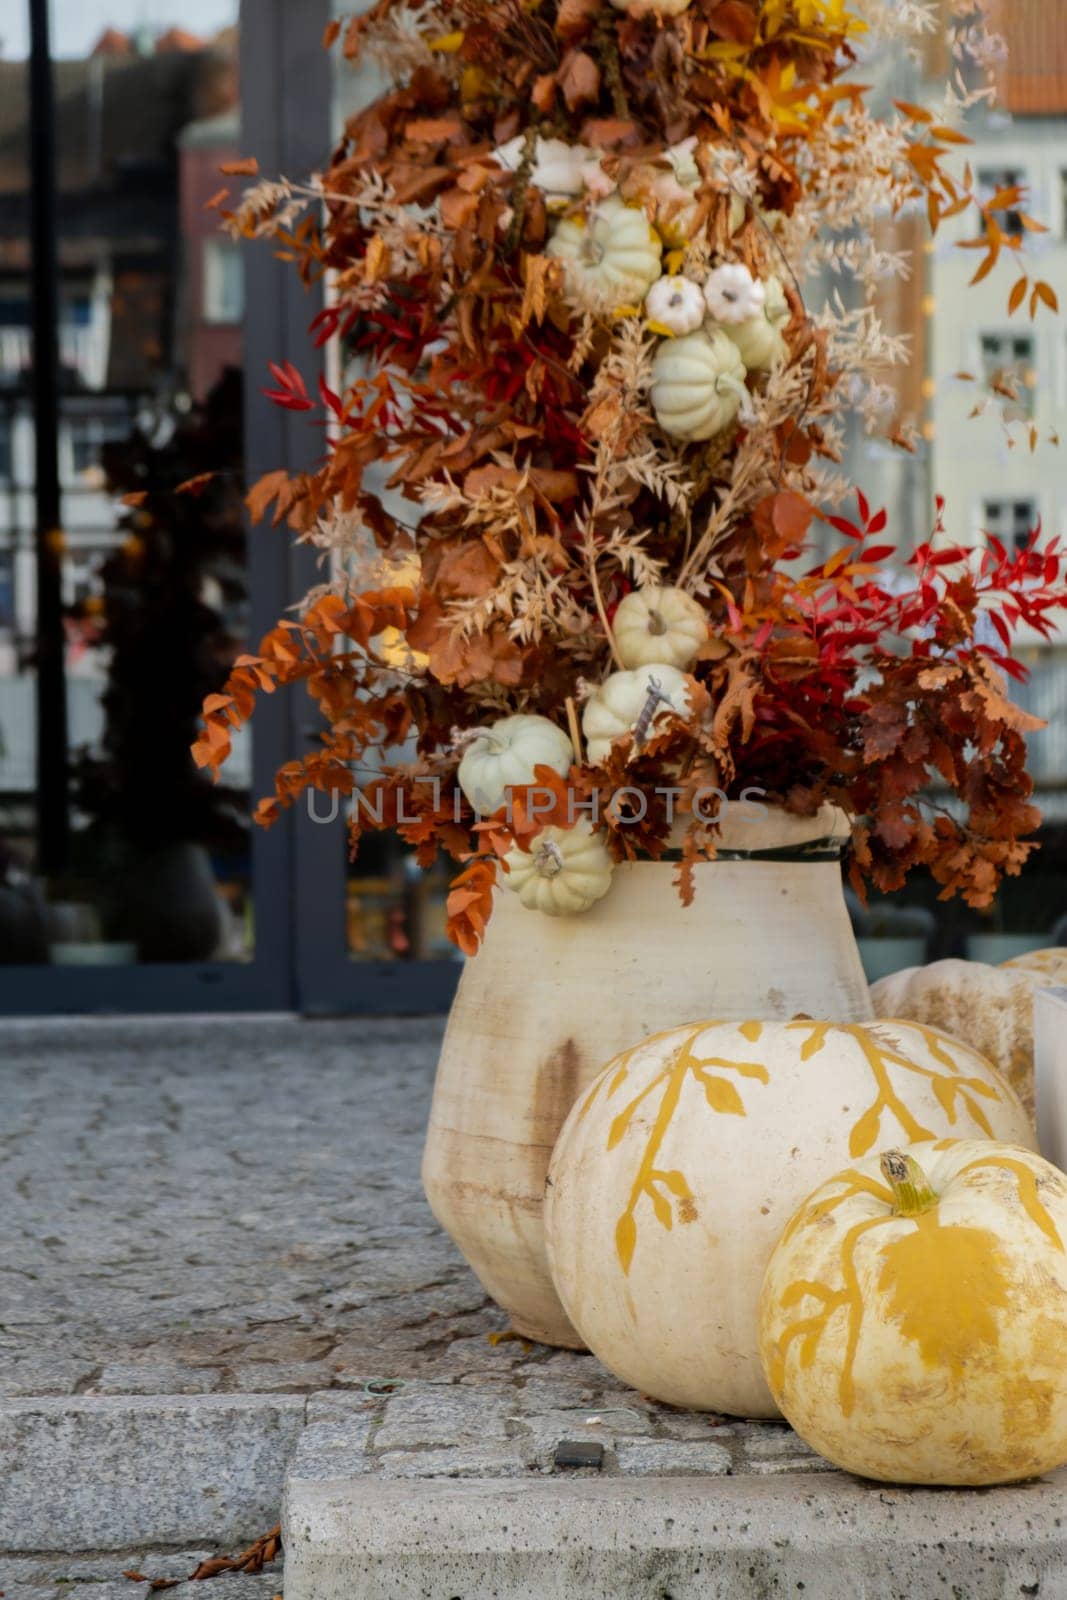 Halloween decorated outdoor cafe or restaurant terrace in America or Europe with pumpkins traditional attributes of Halloween. Frontyard decoration for party.